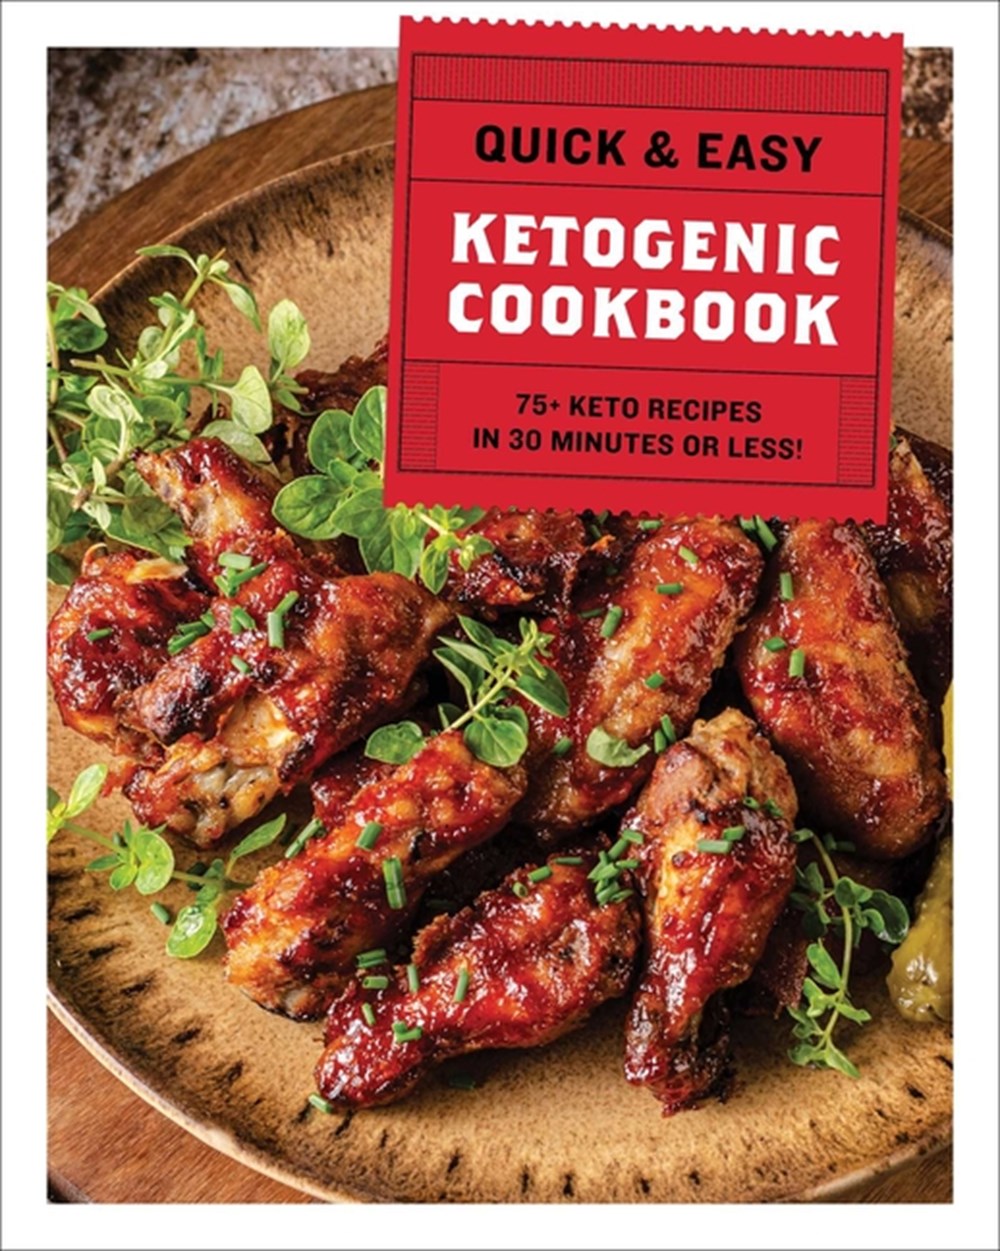 Quick & Easy Ketogenic Cookbook 75+ Recipes in 30 Minutes or Less